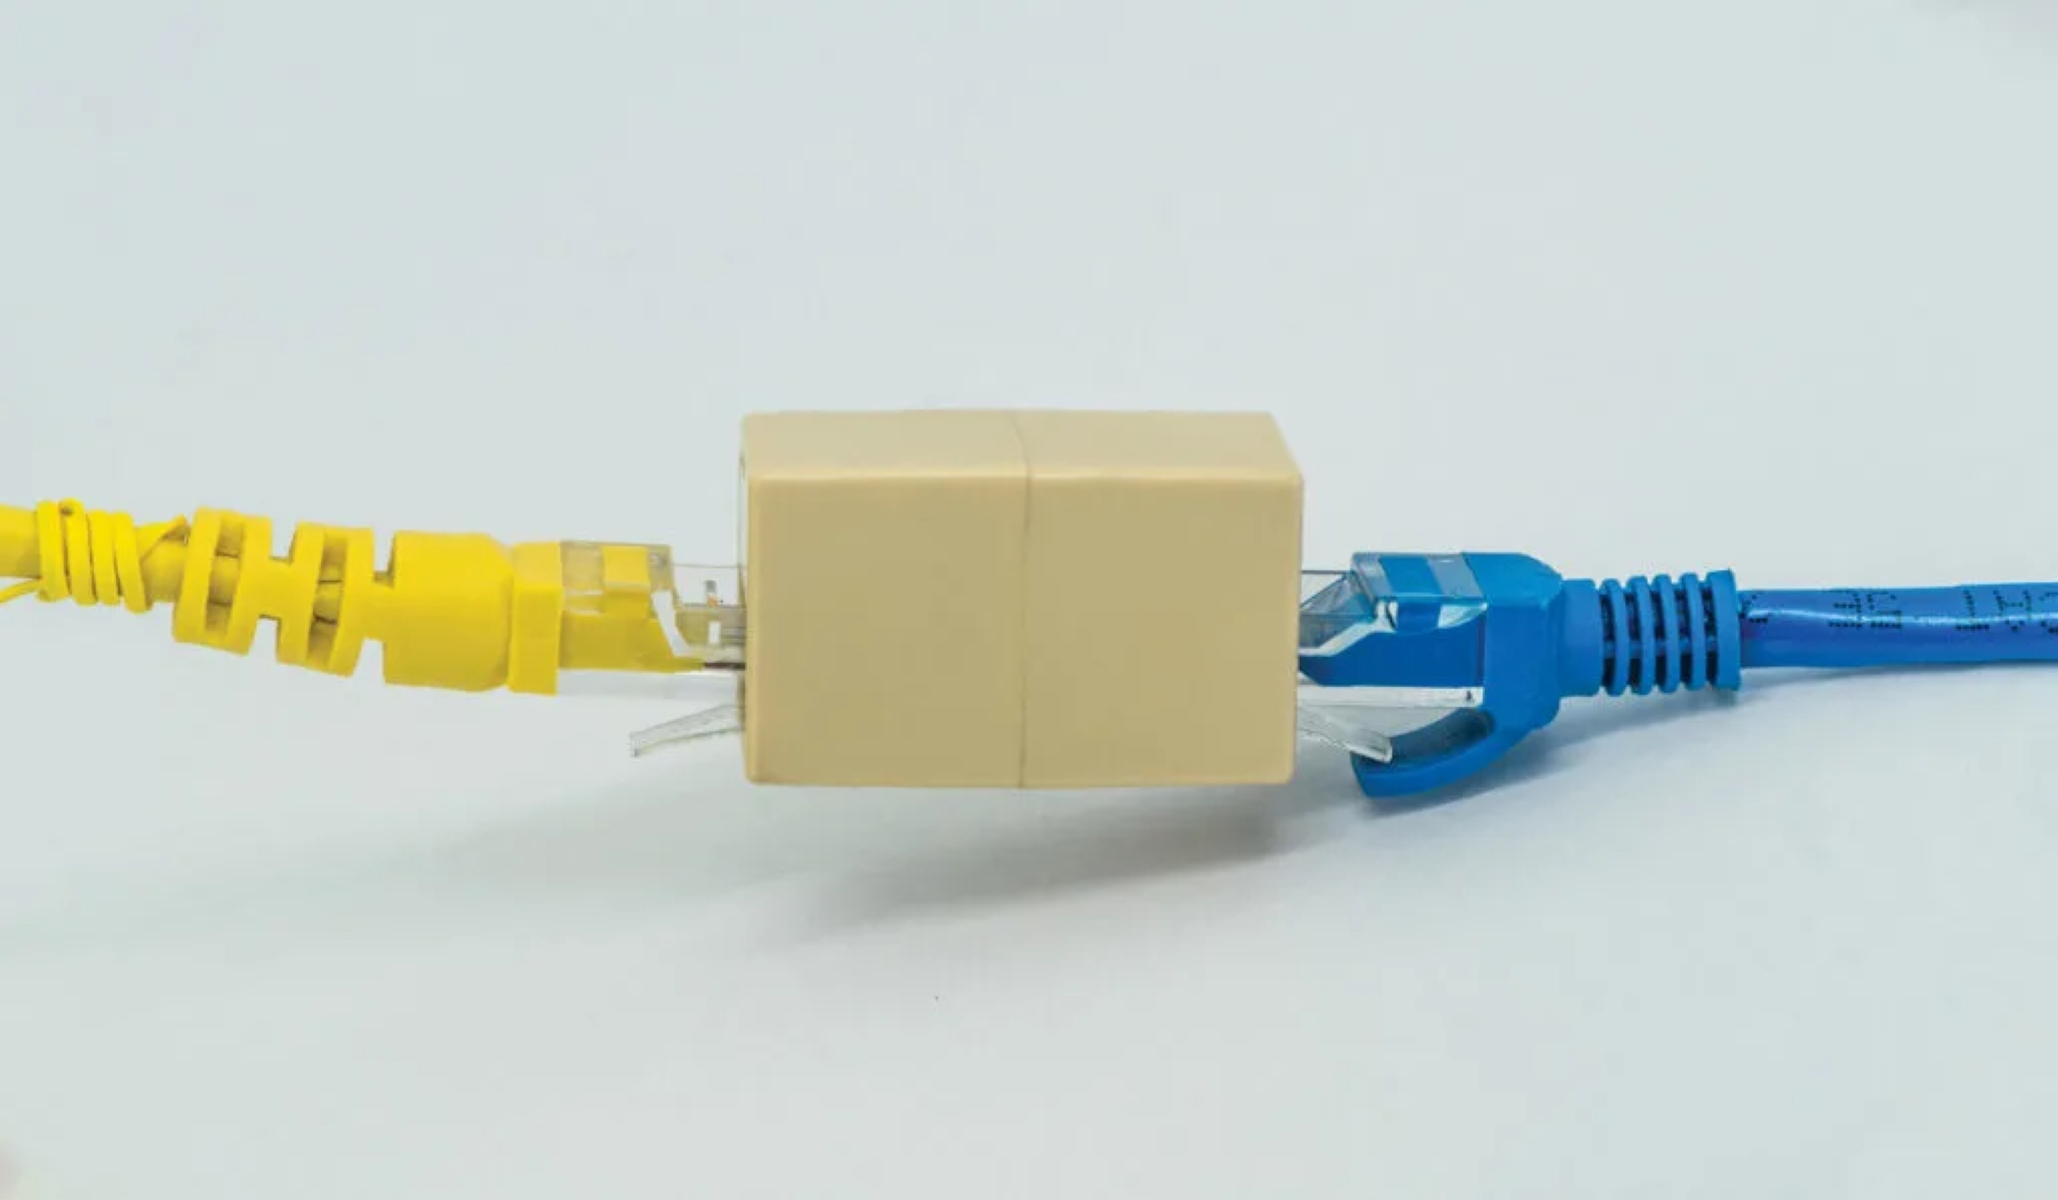 Ensure that all network cables are securely plugged in at both ends.
If using a wired connection, check that the Ethernet cable is not damaged or frayed.